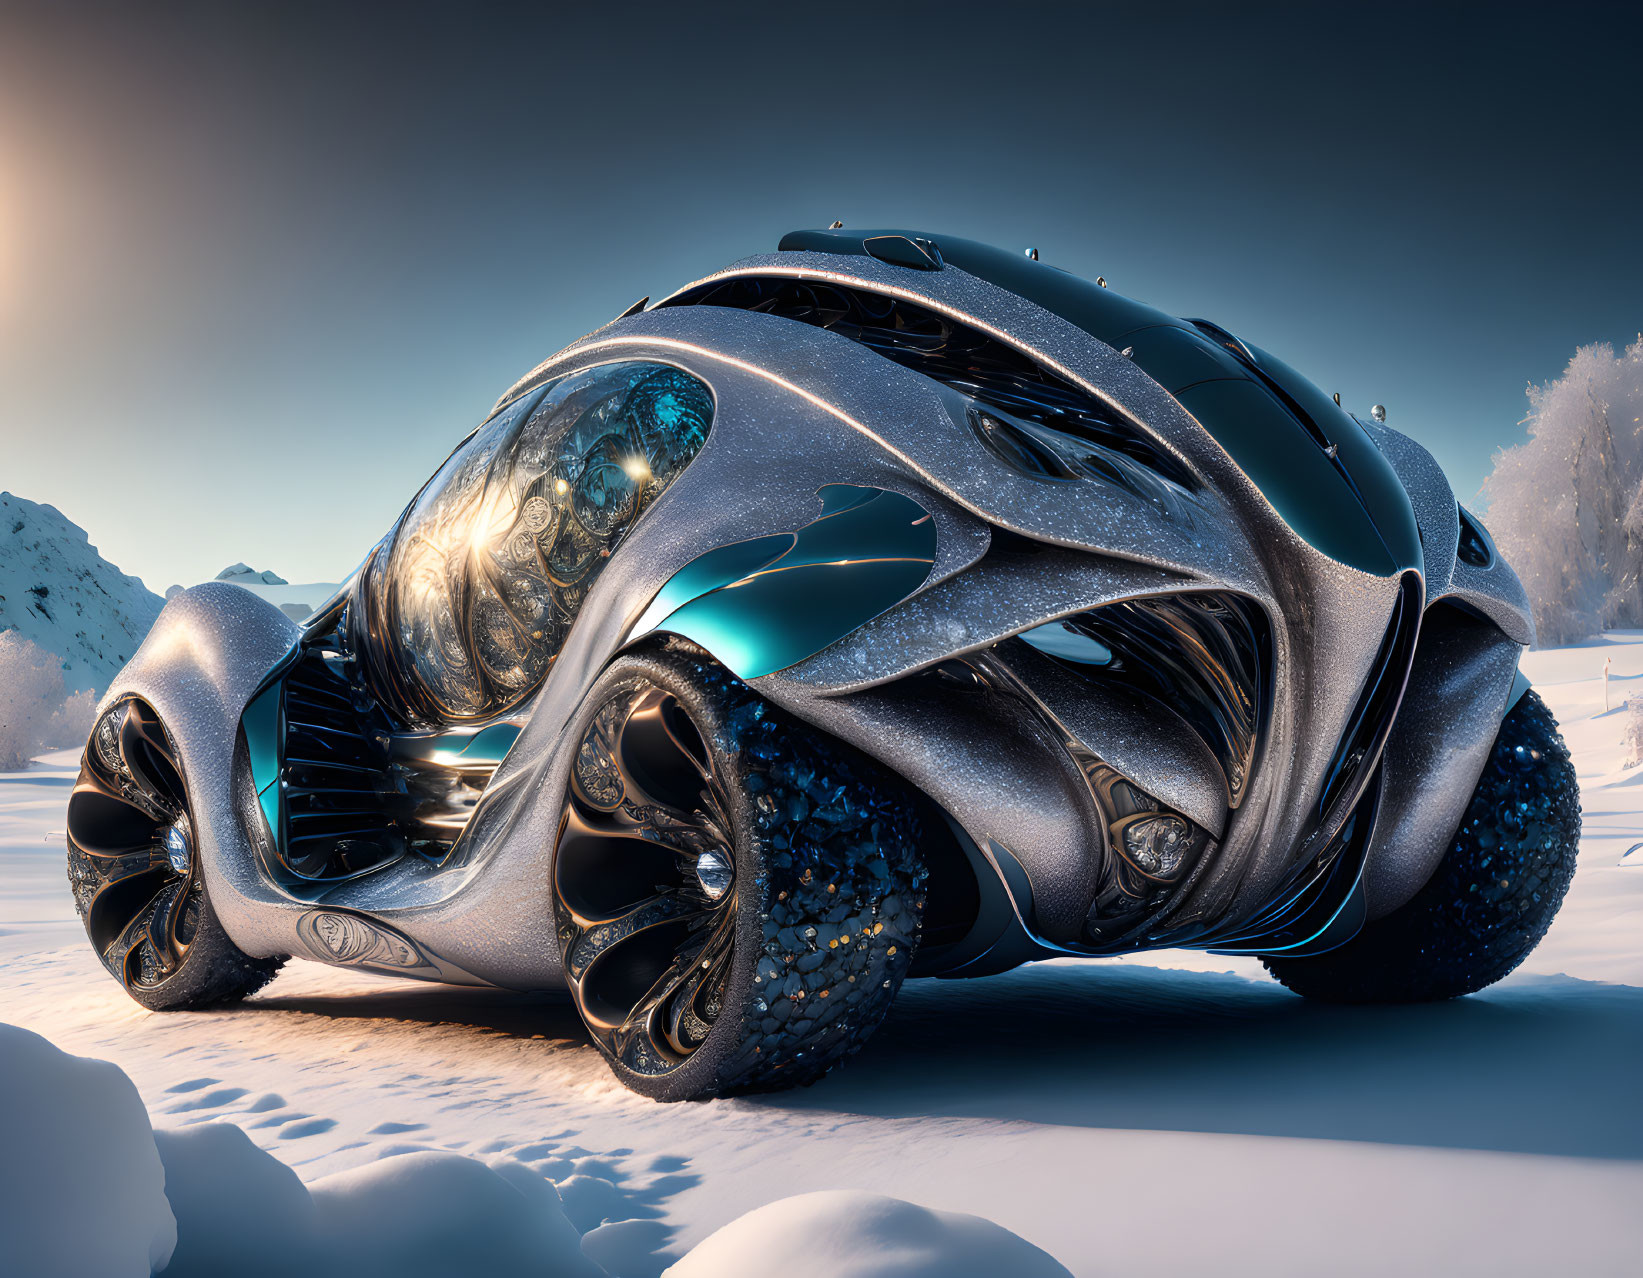 Sleek futuristic car with transparent dome in snowy landscape